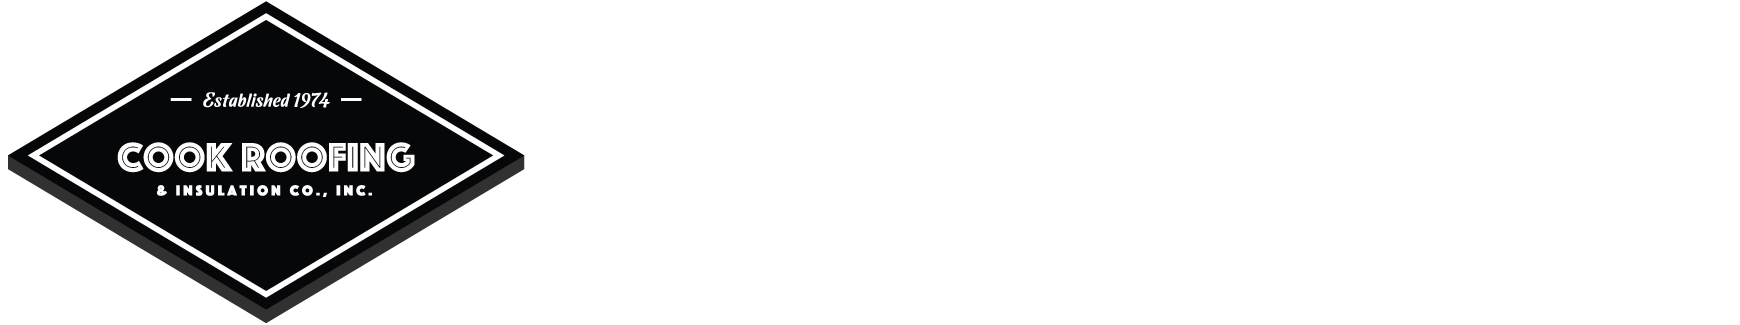 Cook Roofing Logo